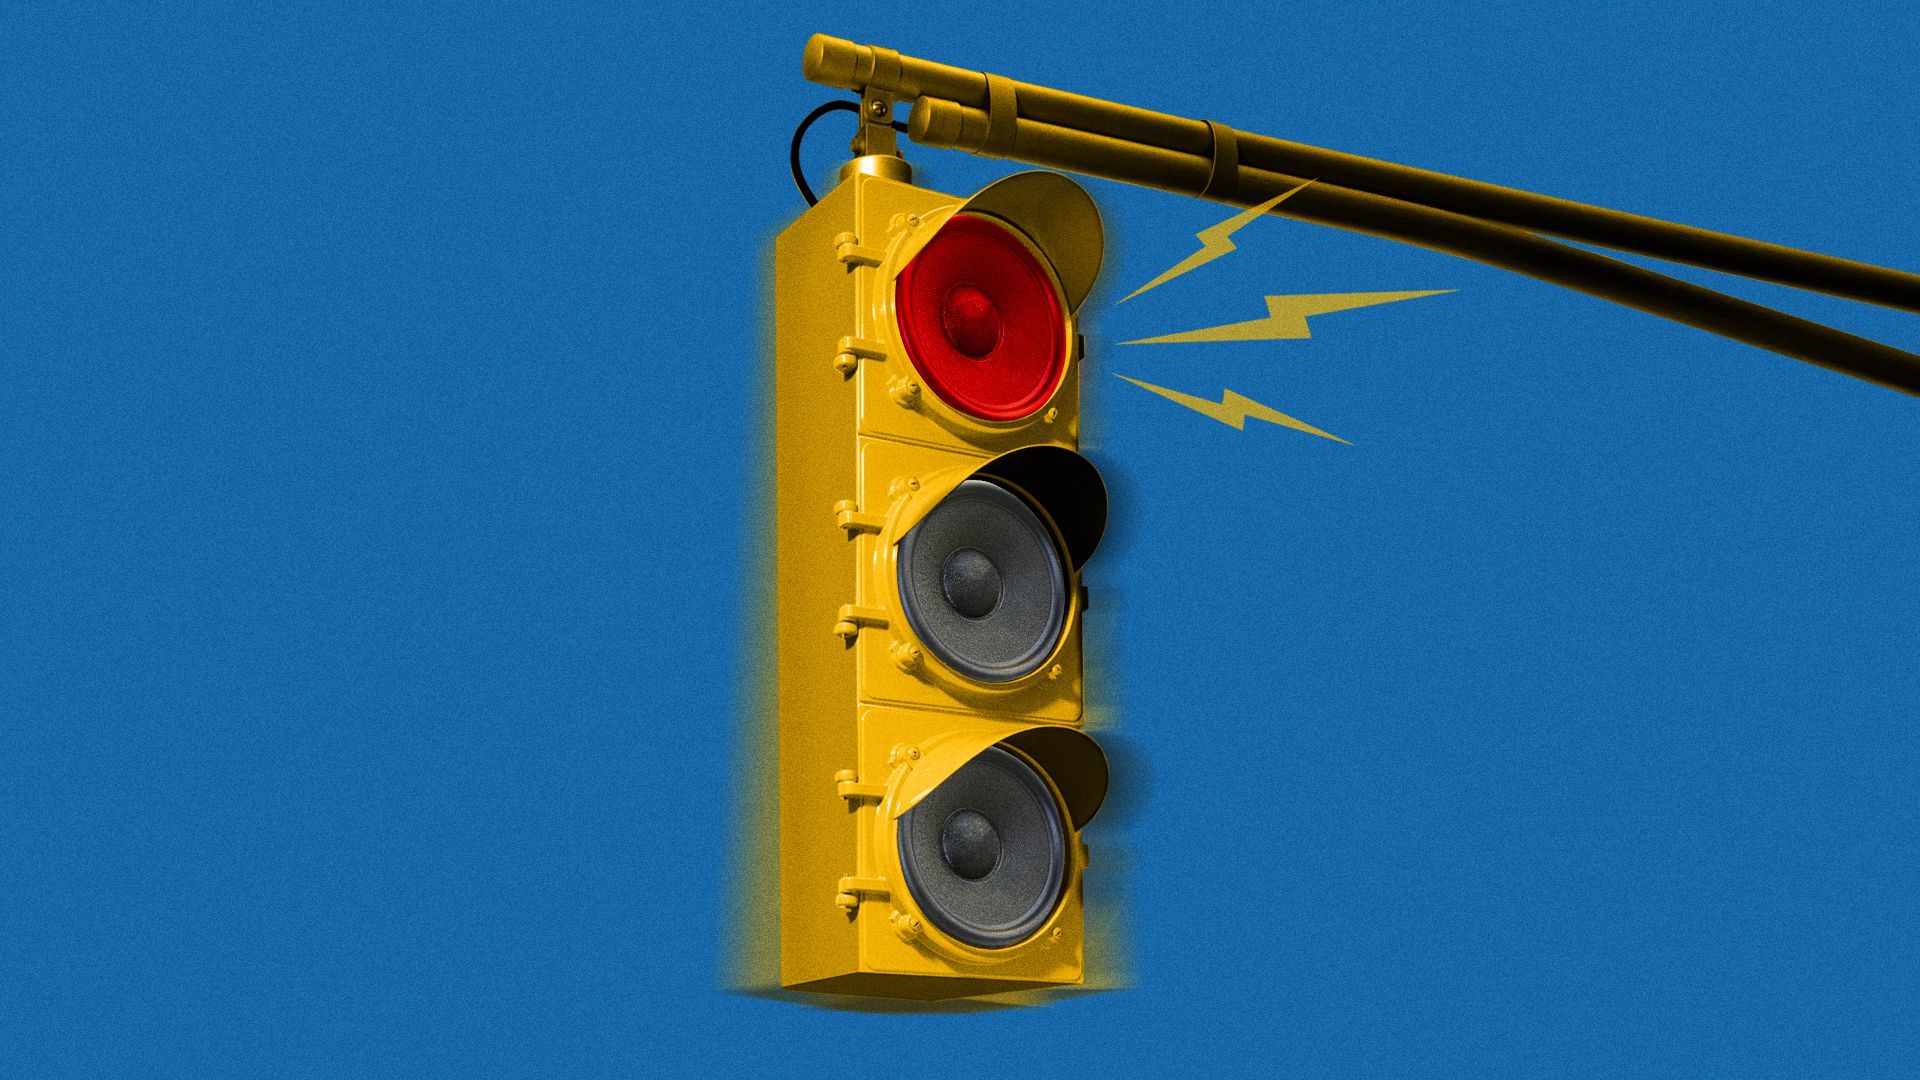 A traffic light with noisy speakers instead of lights.